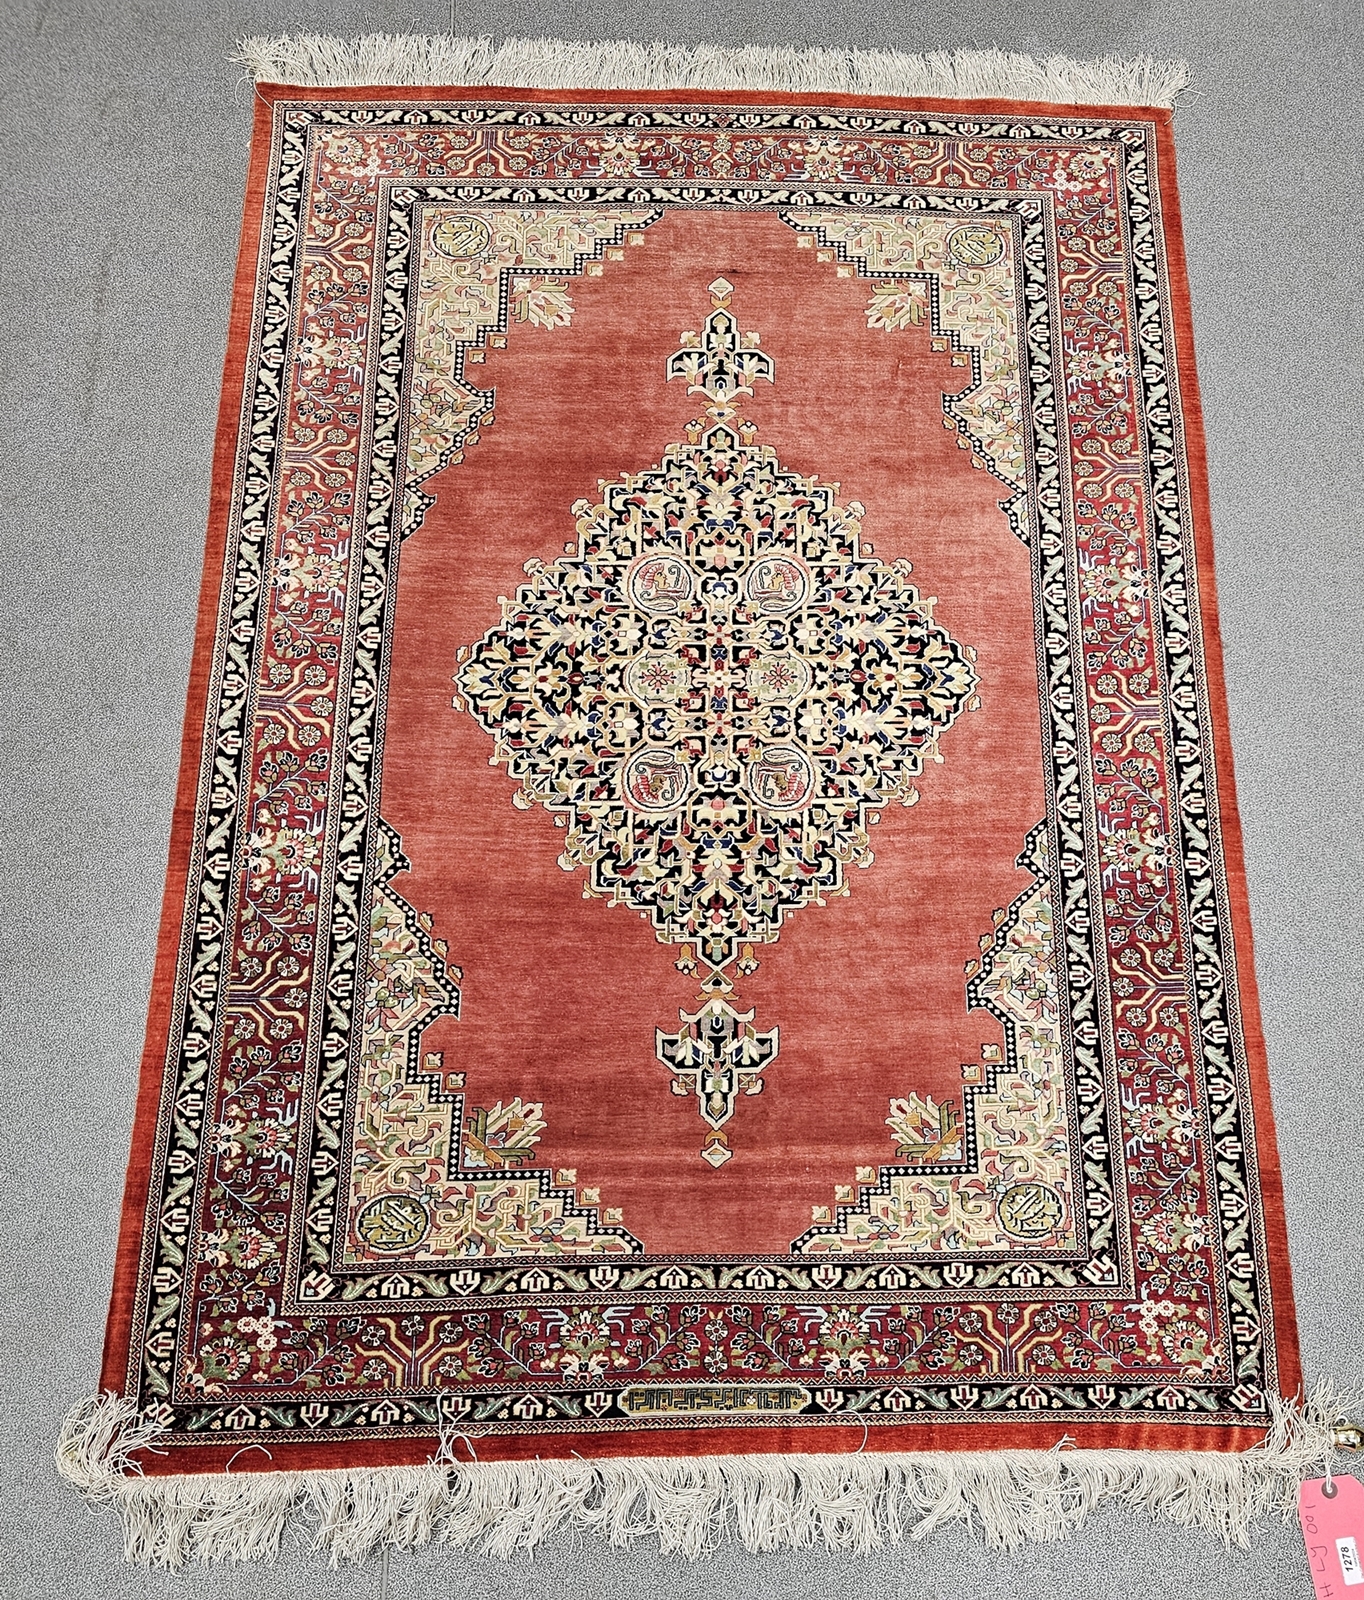 Eastern red ground silk rug, possibly Iraq, the central lozenge medallion depicting flowers and